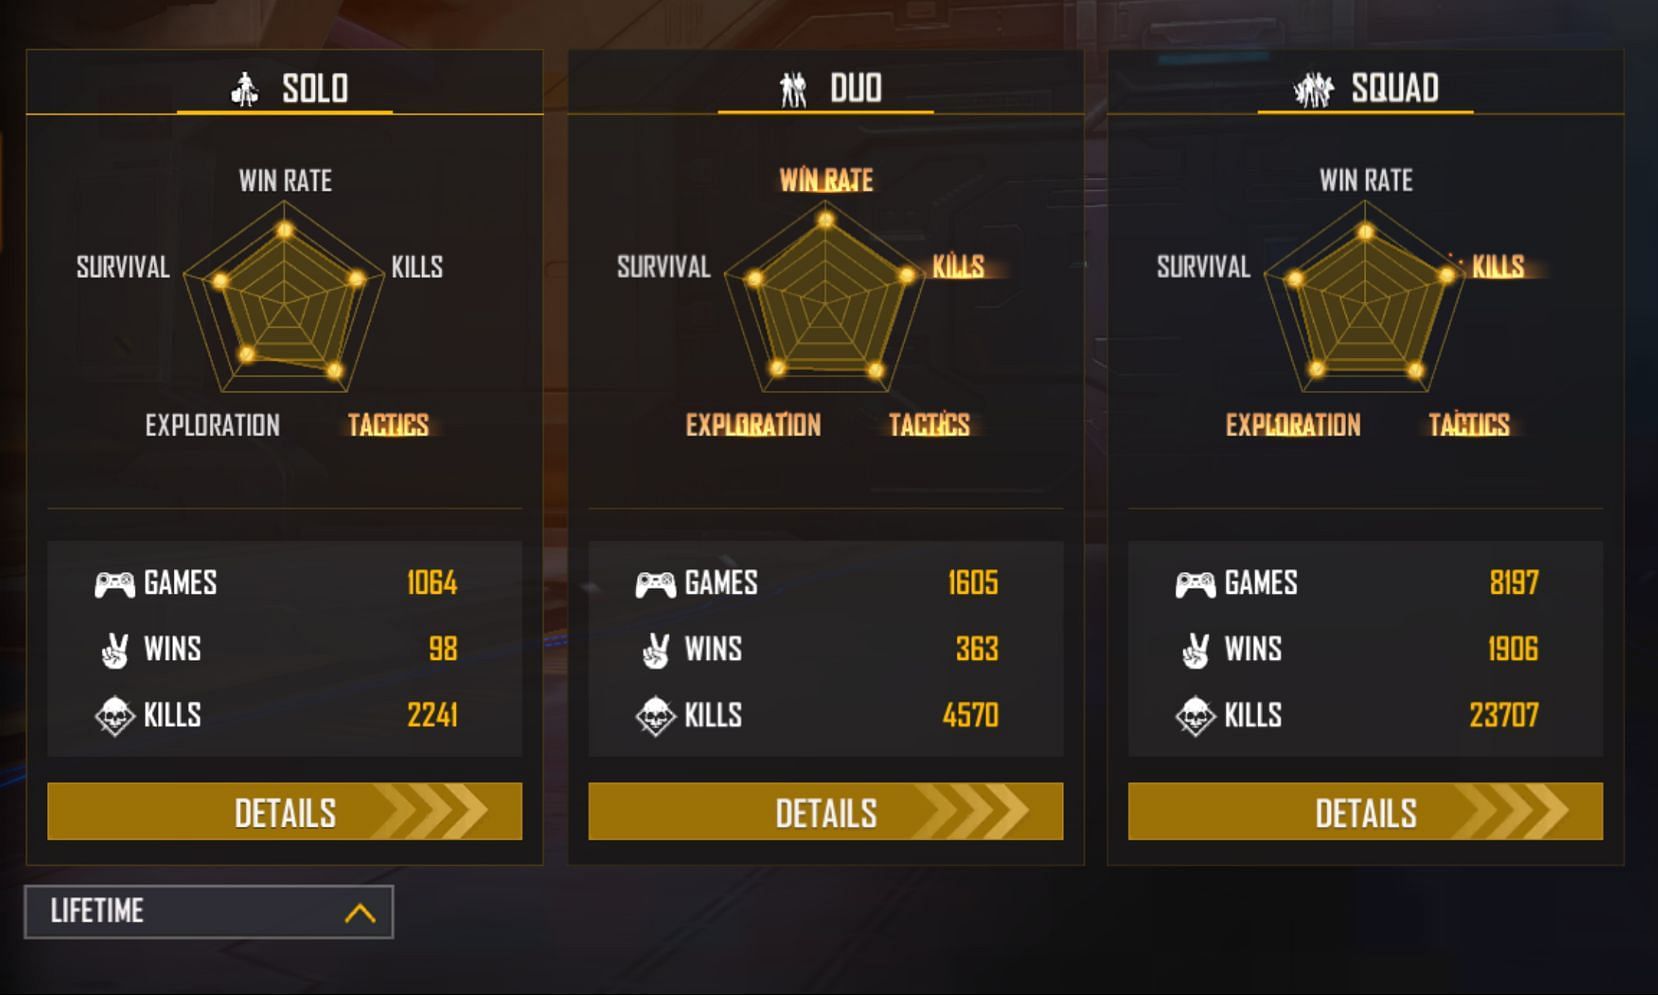 Kutty Gokul has 23.7k frags in squad matches (Image via Garena)